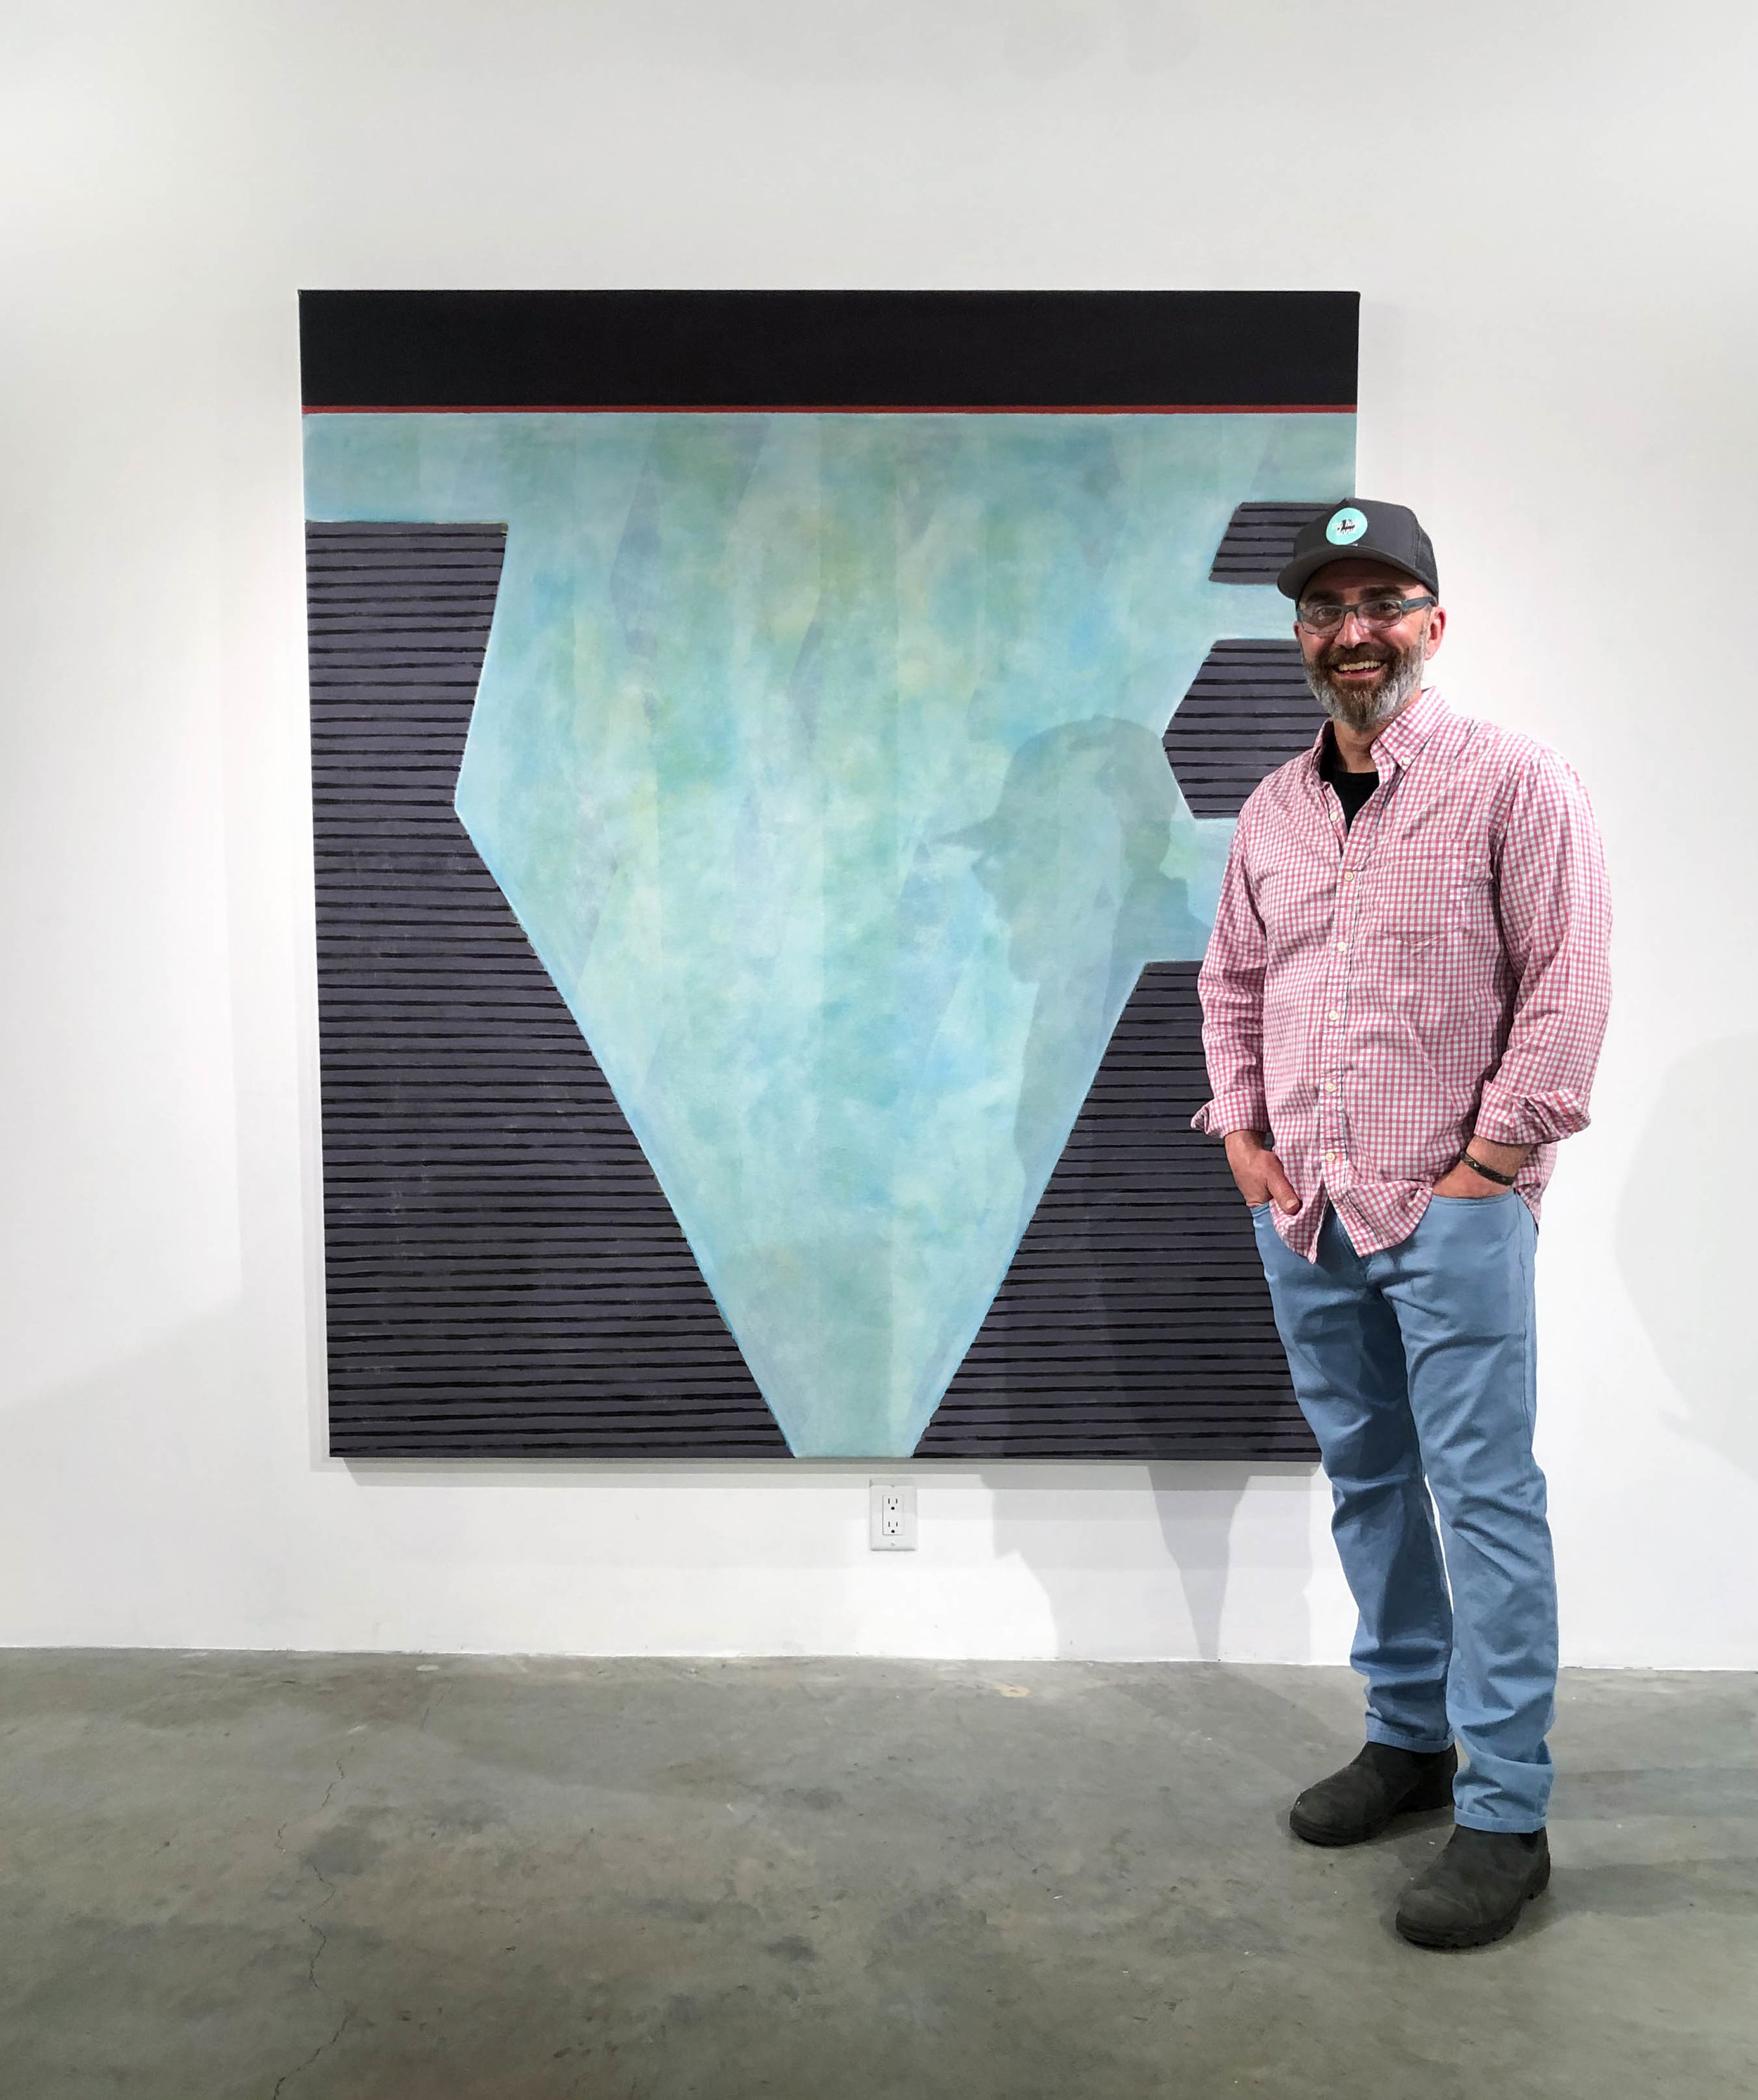 Artist Richard Keen in front of his work at Abigail Ogilvy Gallery: Form Singularity No. 165, Acrylic and Oil on Canvas, 72 x 64 in., 2019